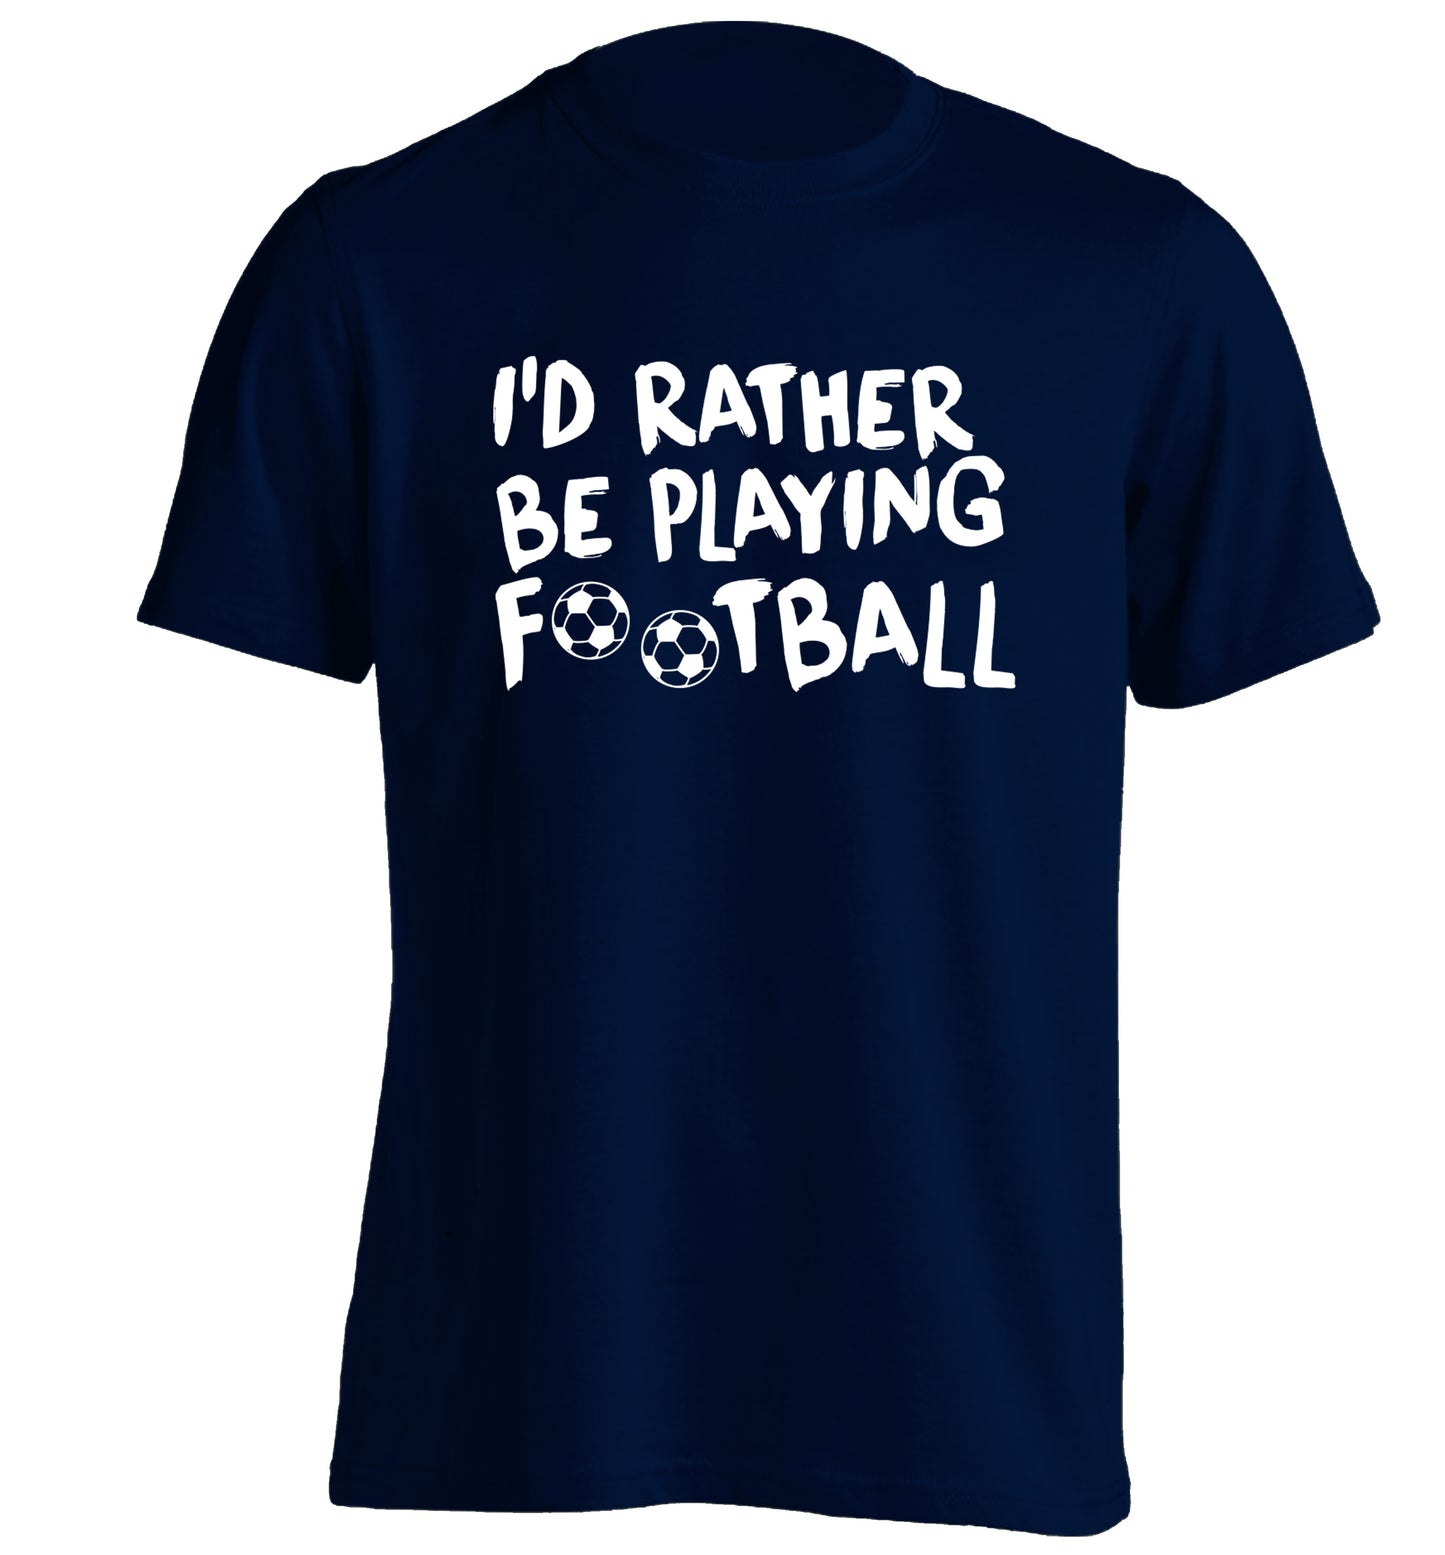 I'd rather be playing football adults unisexnavy Tshirt 2XL